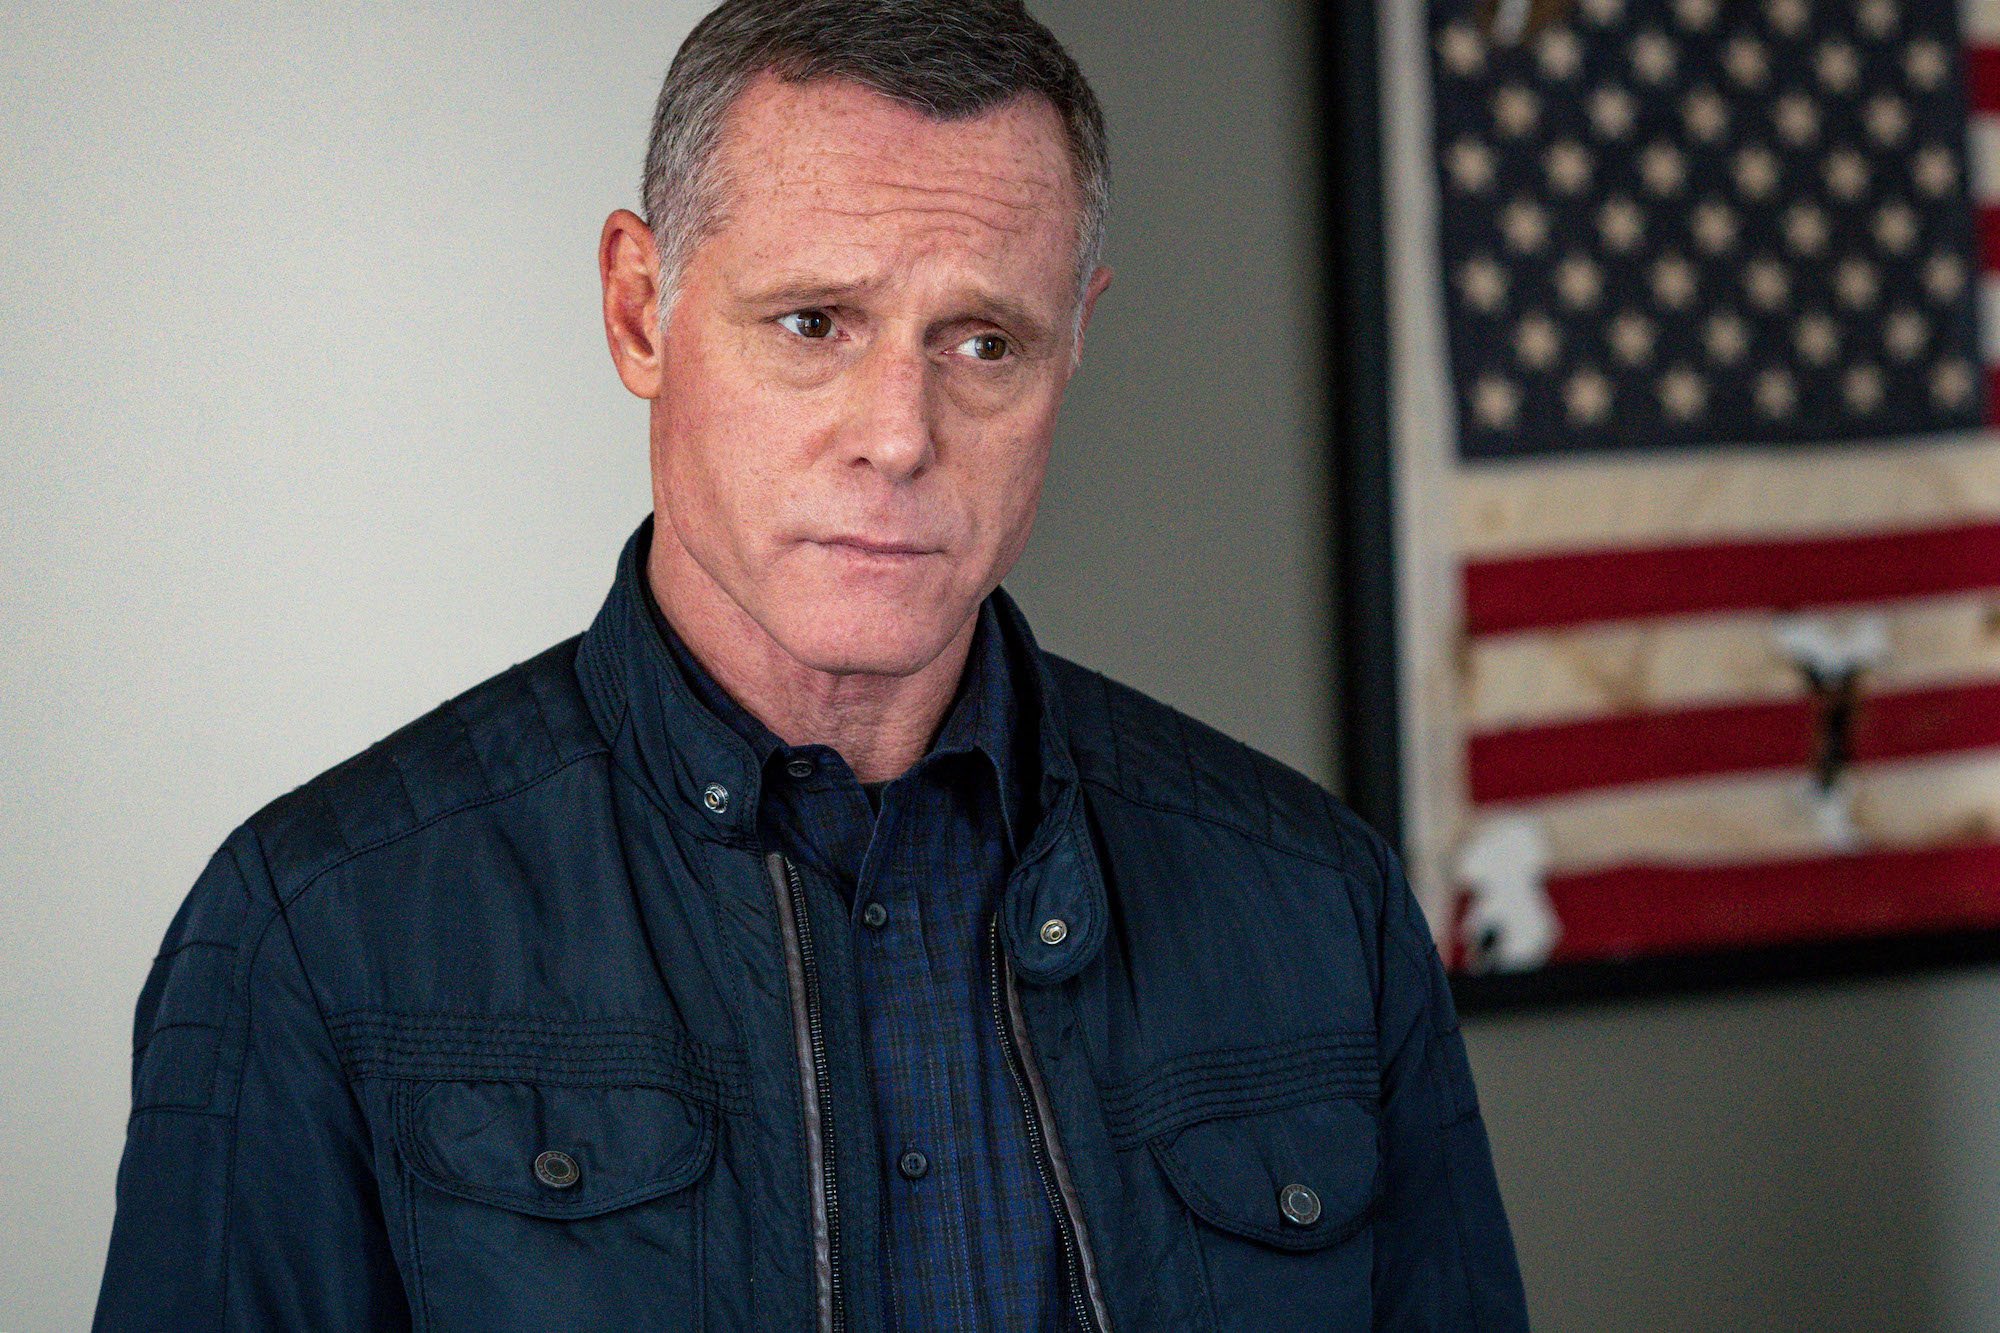 Jason Beghe as Hank Voight looking off camera, not smiling